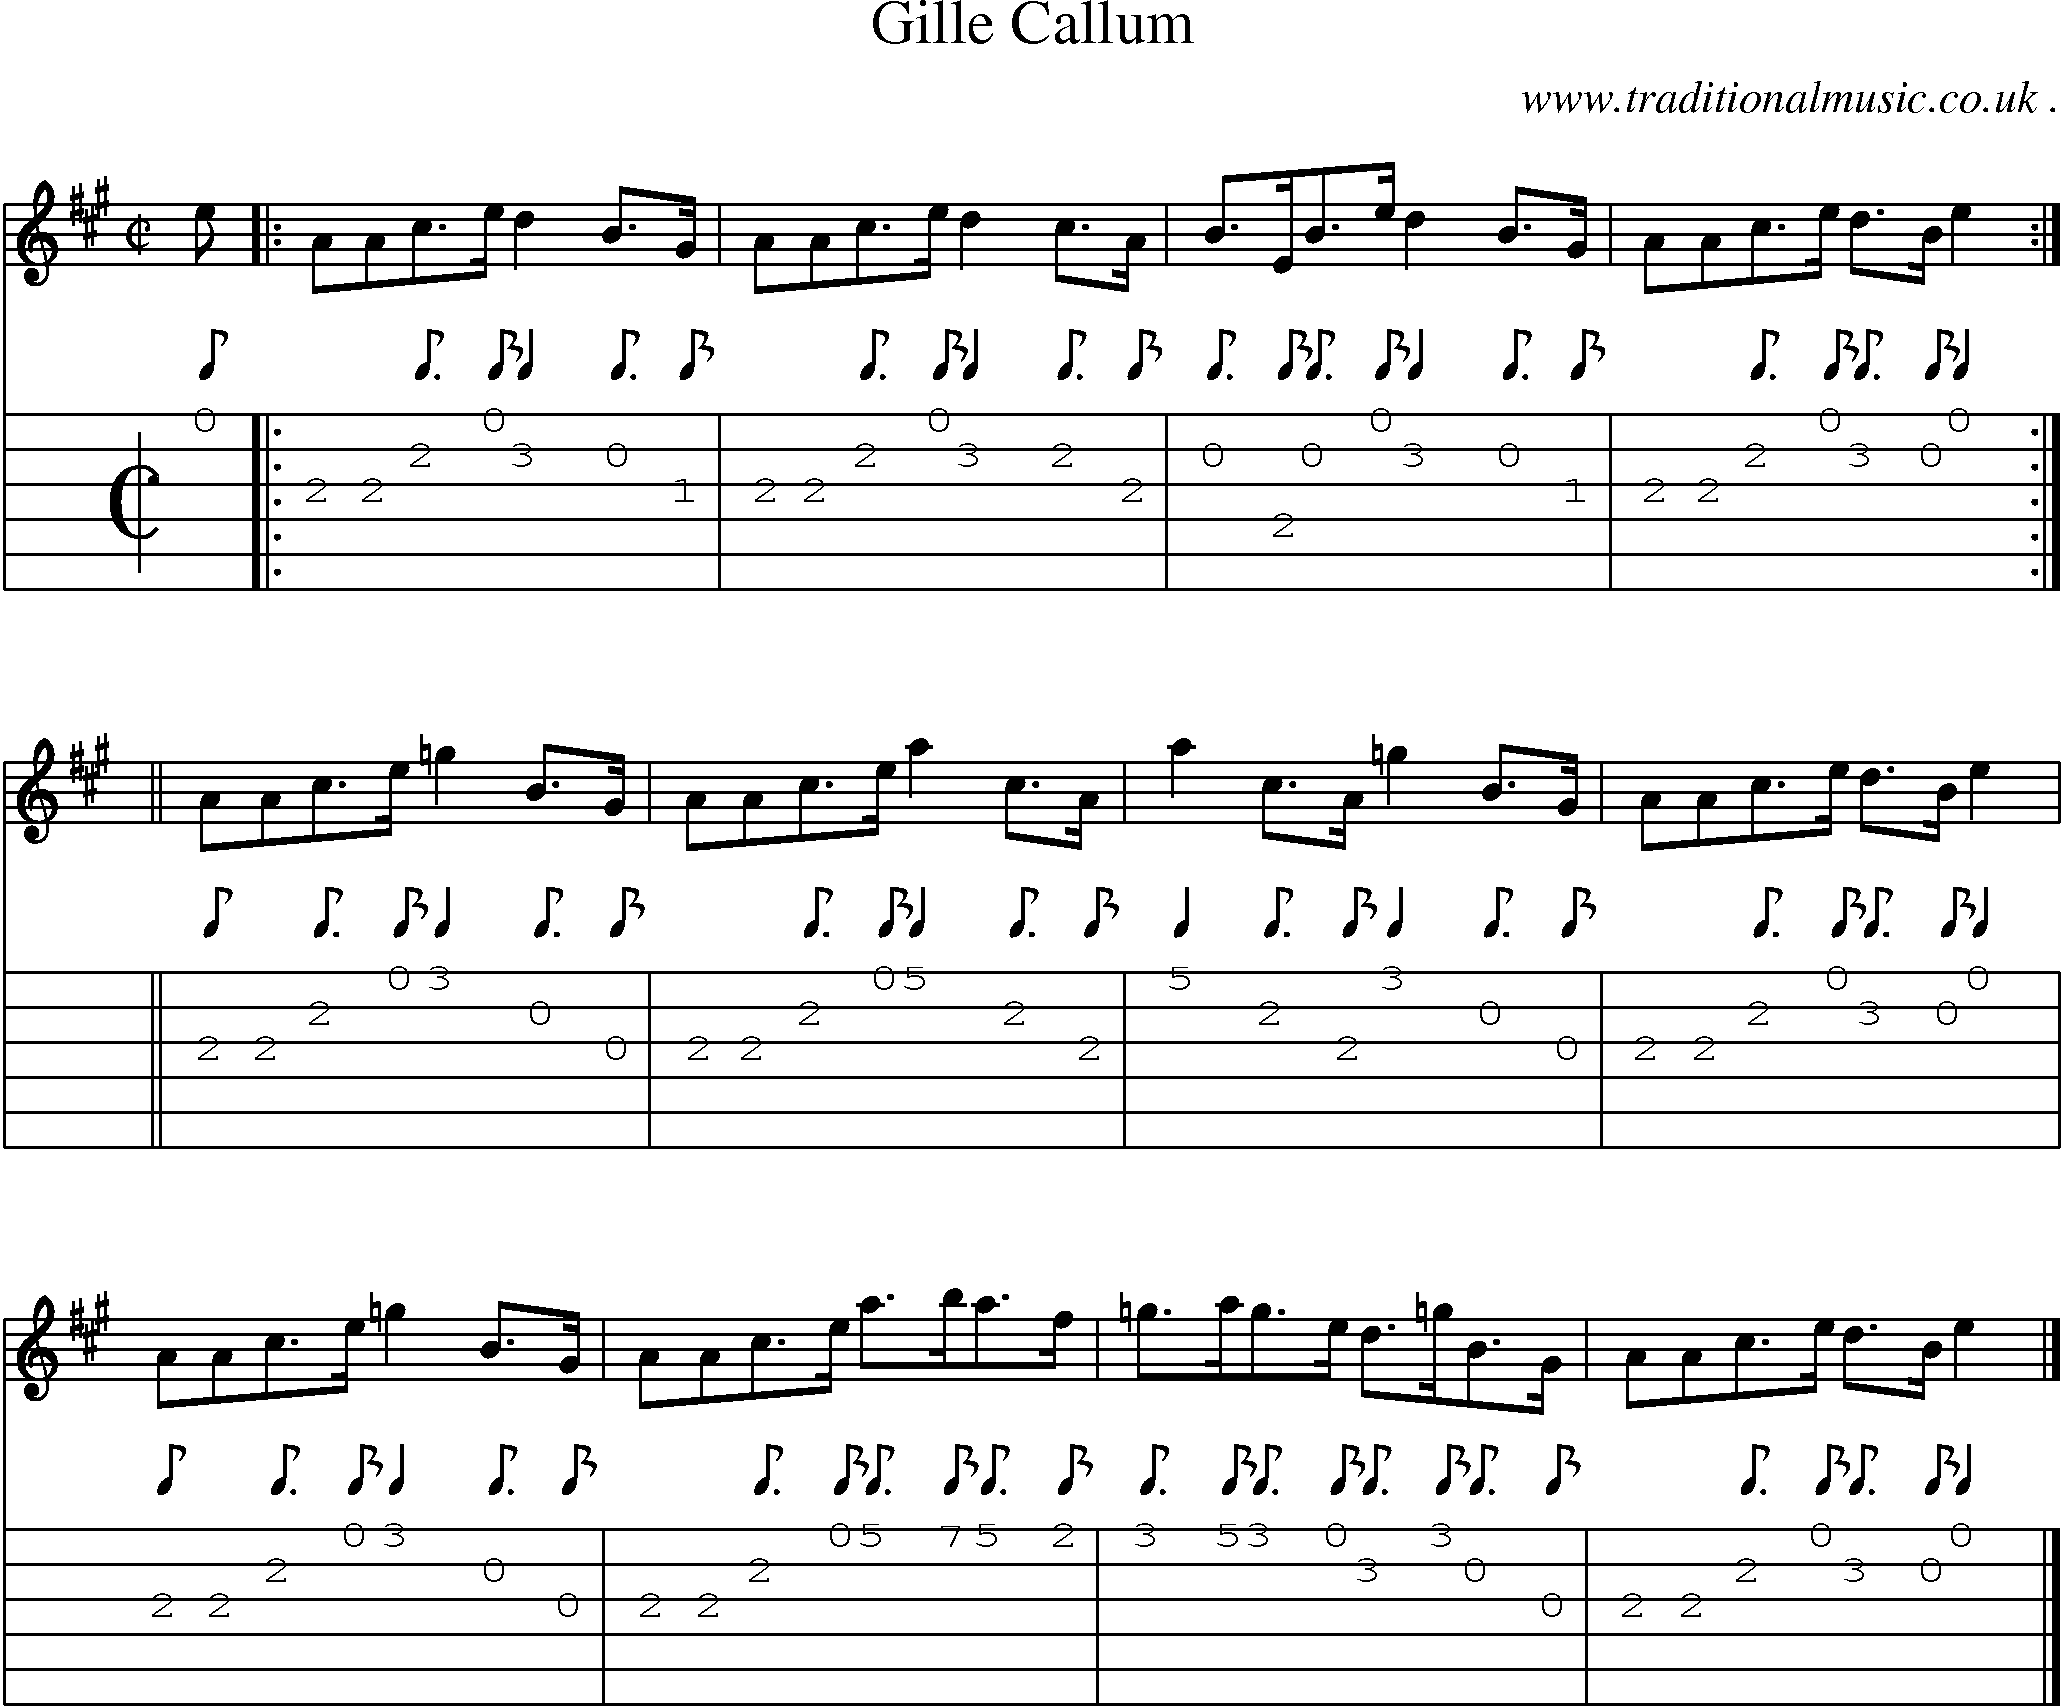 Sheet-music  score, Chords and Guitar Tabs for Gille Callum